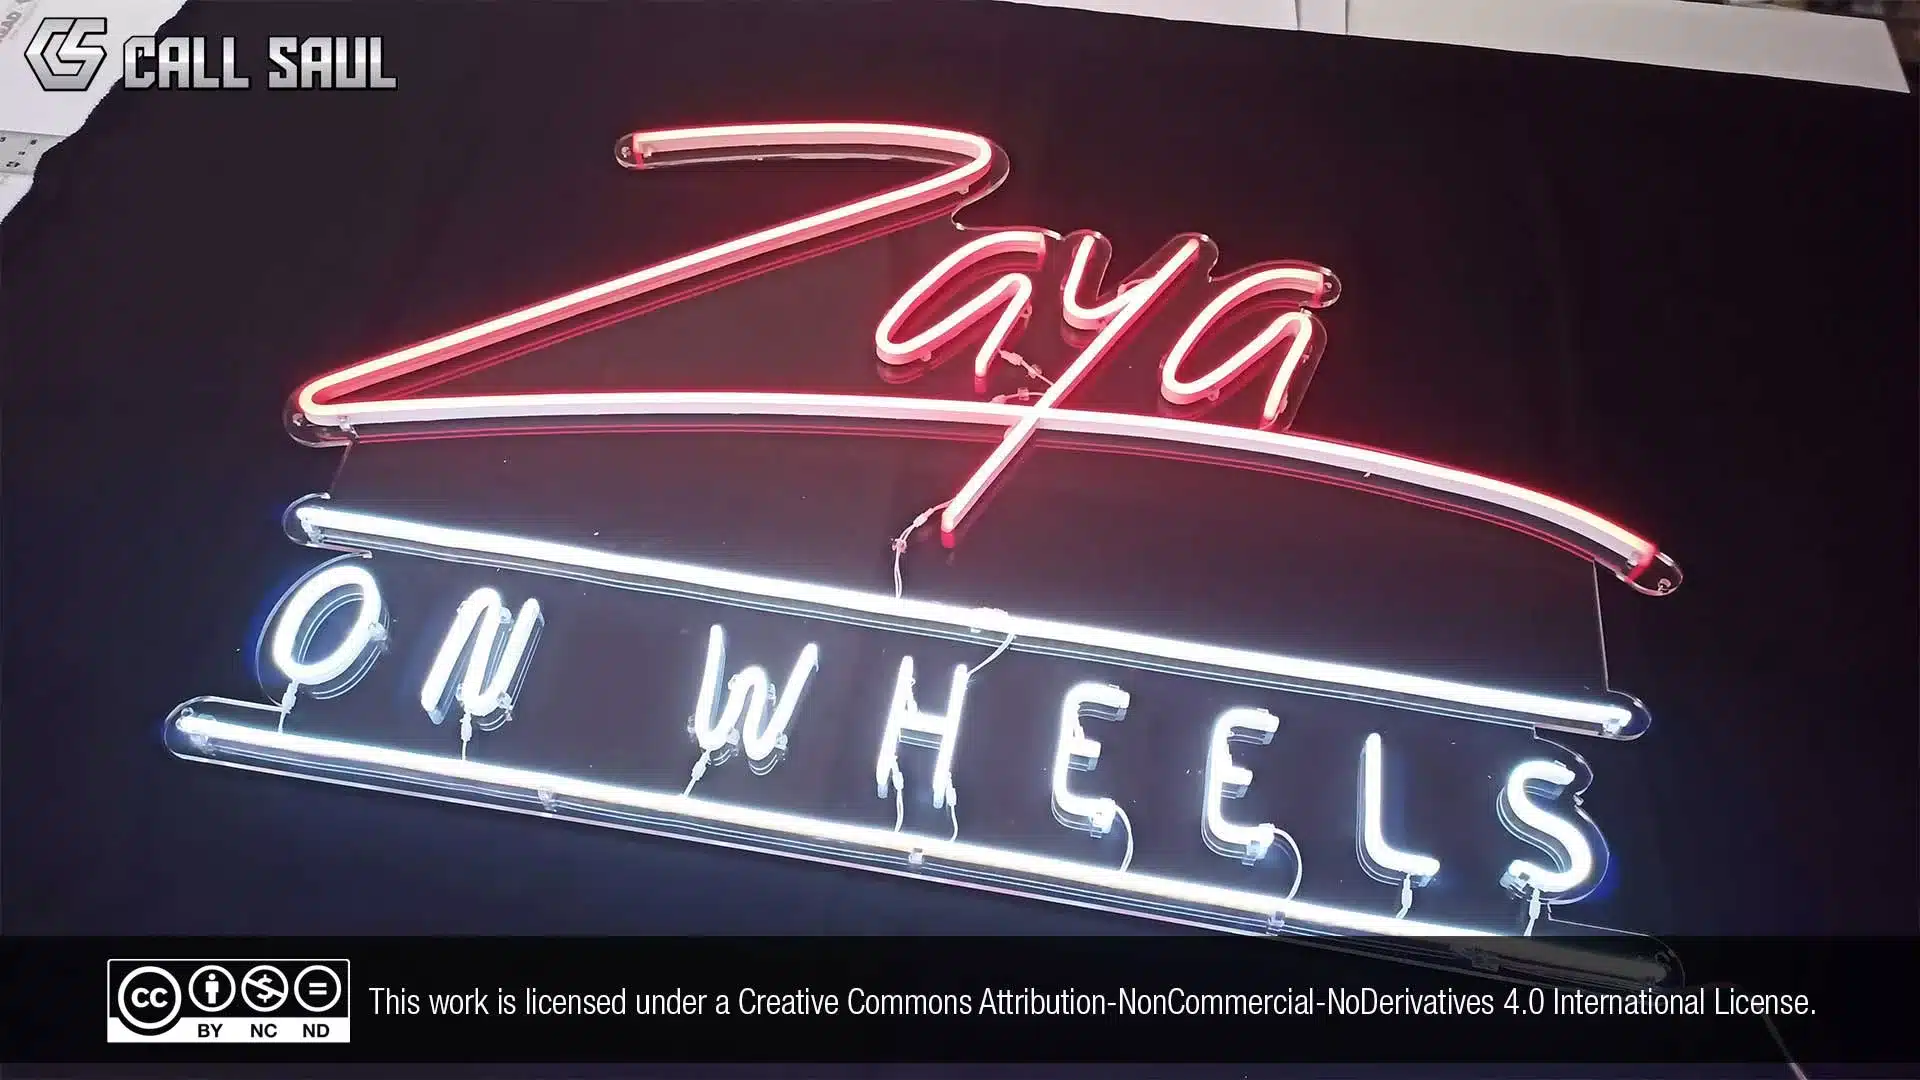 Zaya On Wheels White and Red Color LED Neon Sign